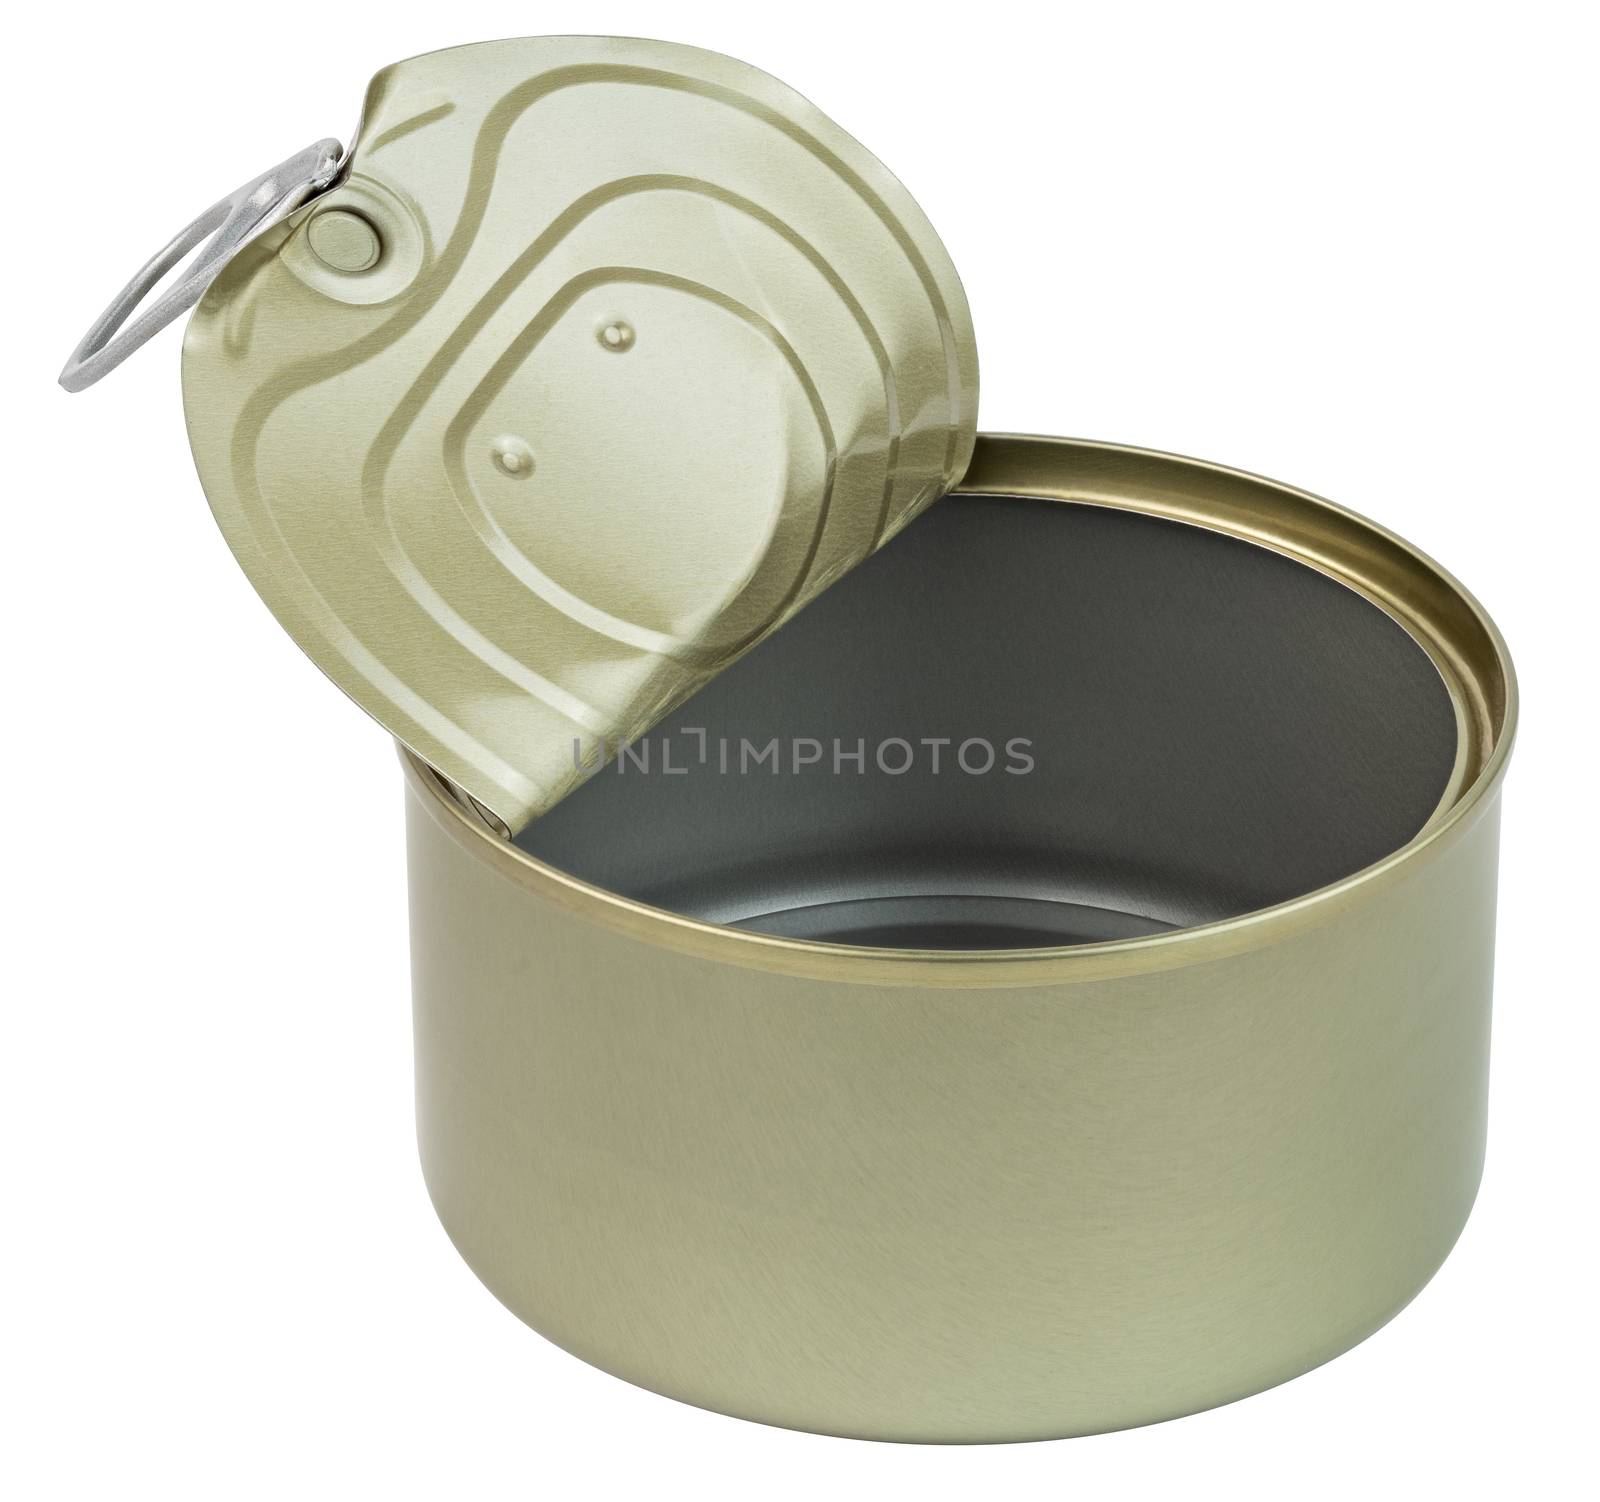 opened clean tin can with pull tab ring, bended lid and empty - isolated on white by z1b